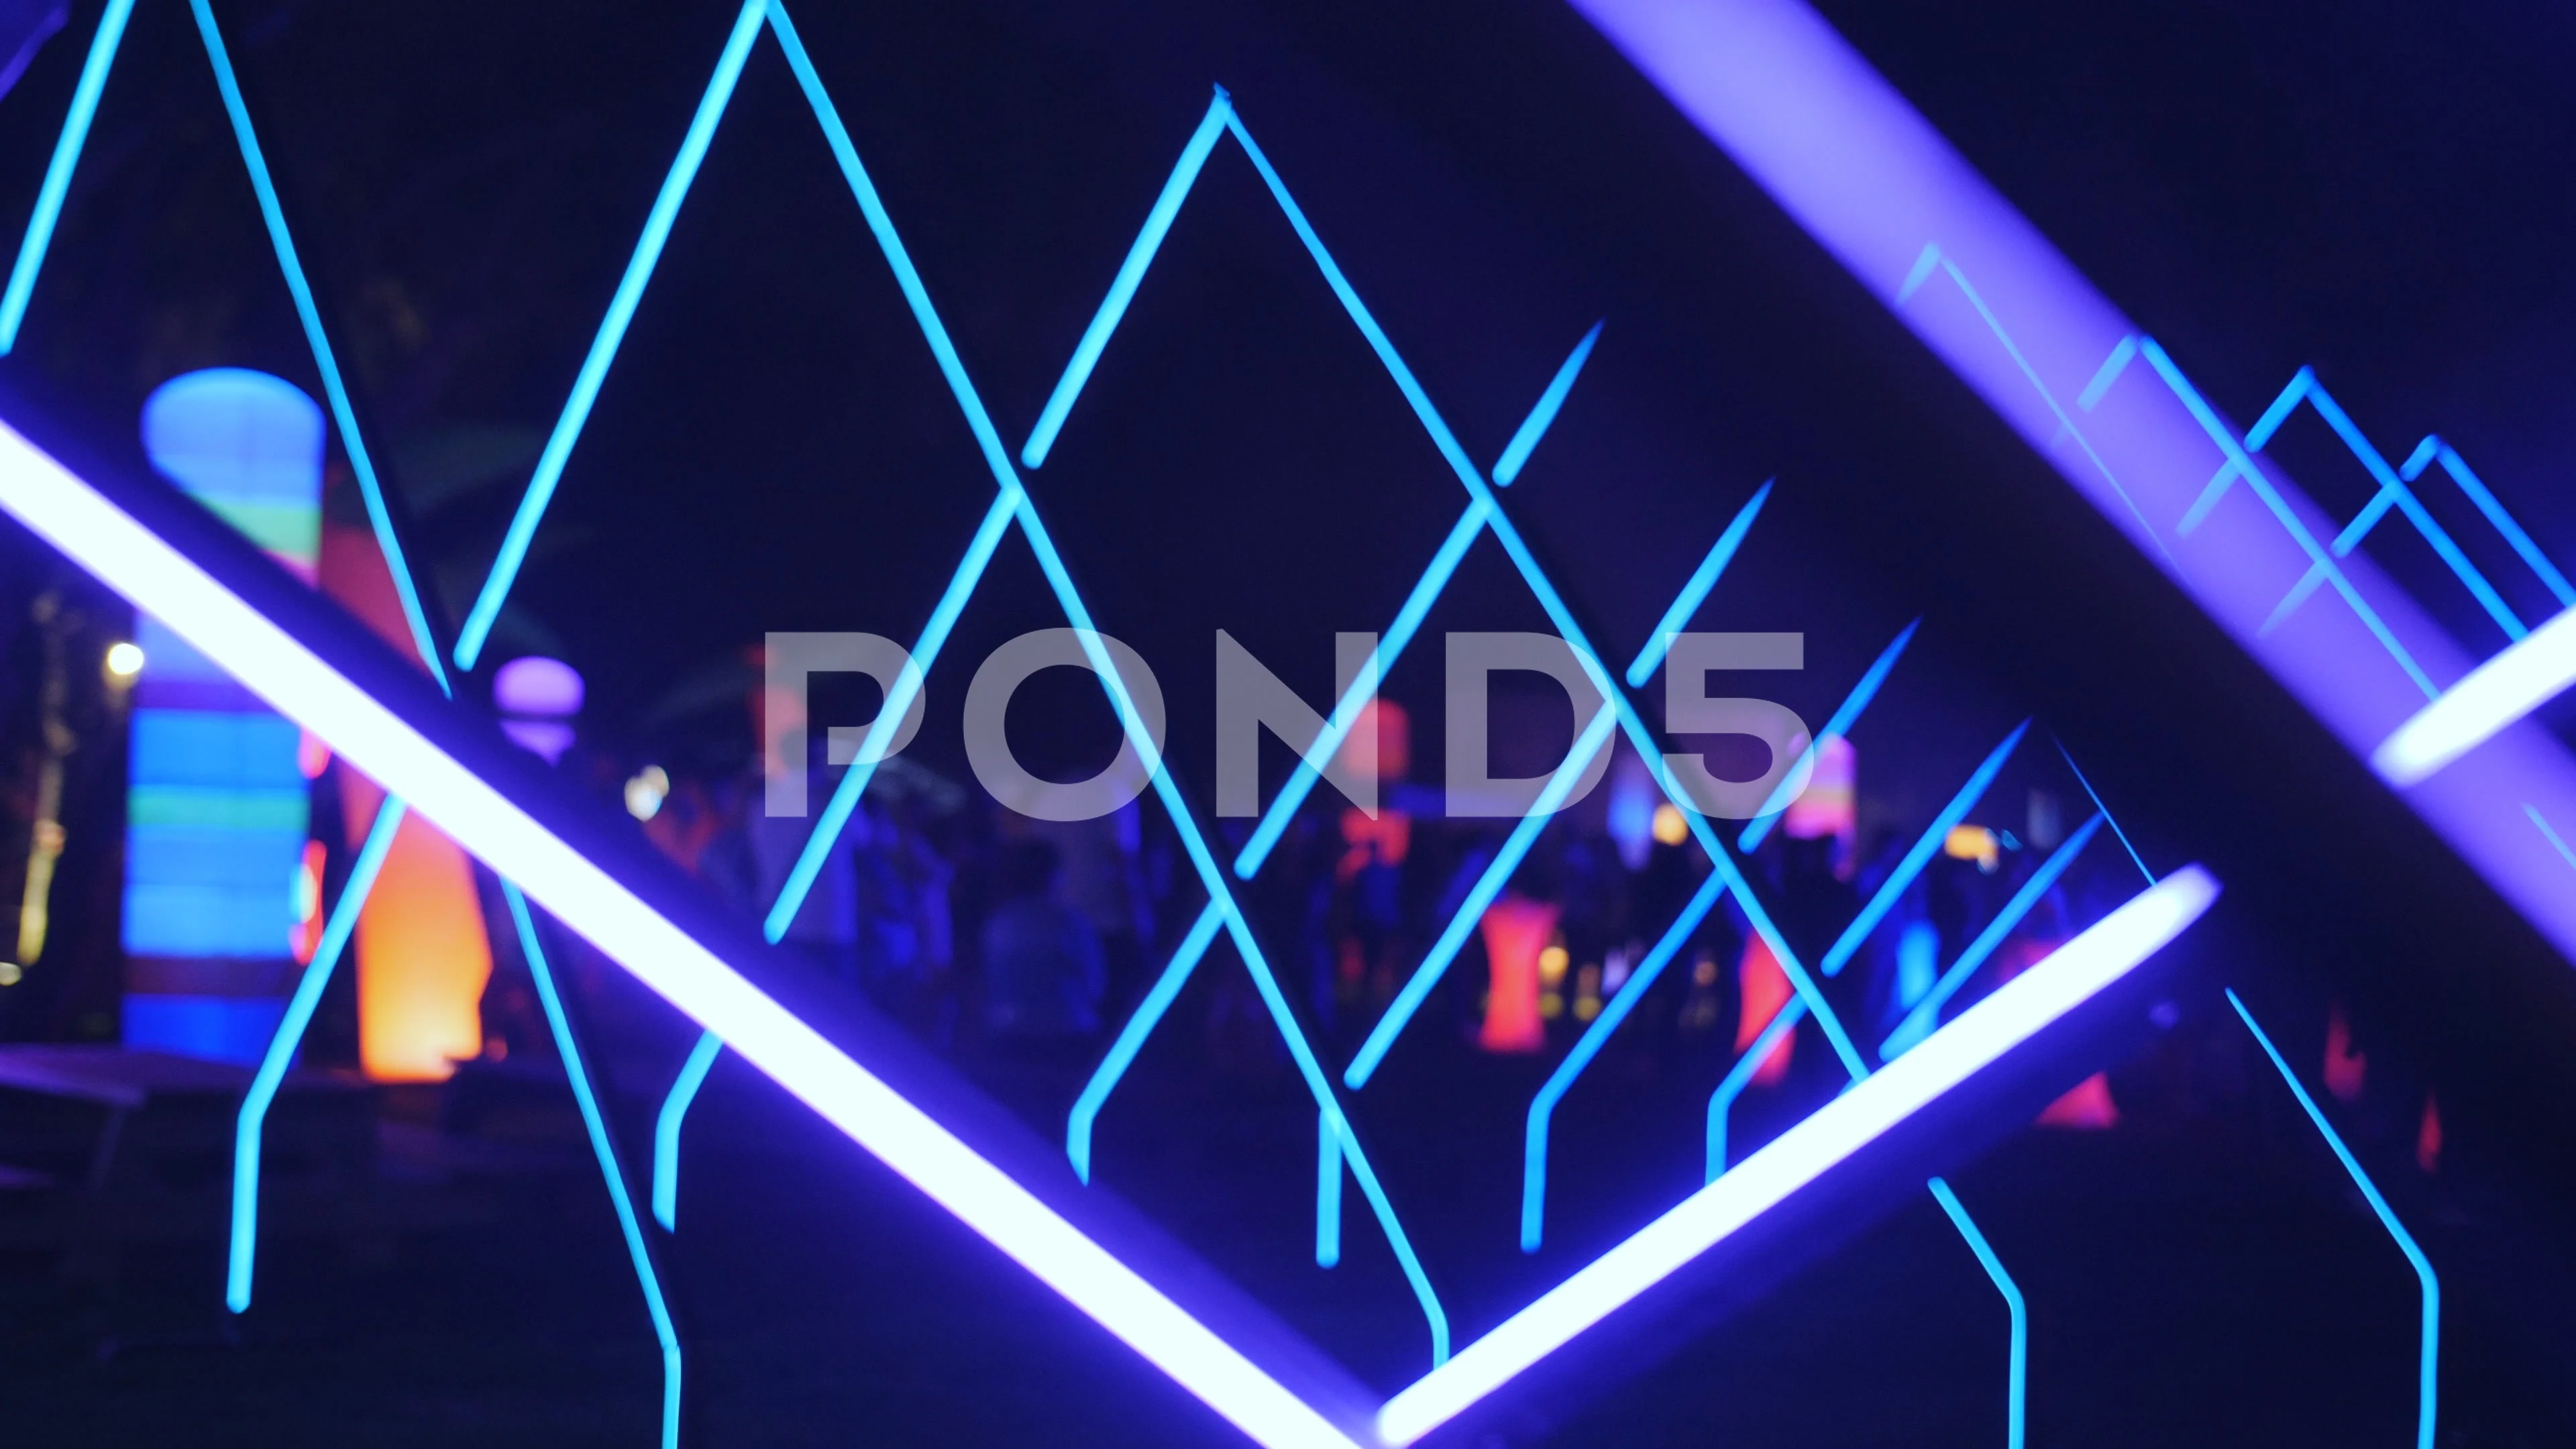 Glowing neon decorations outdoor in fron, Stock Video